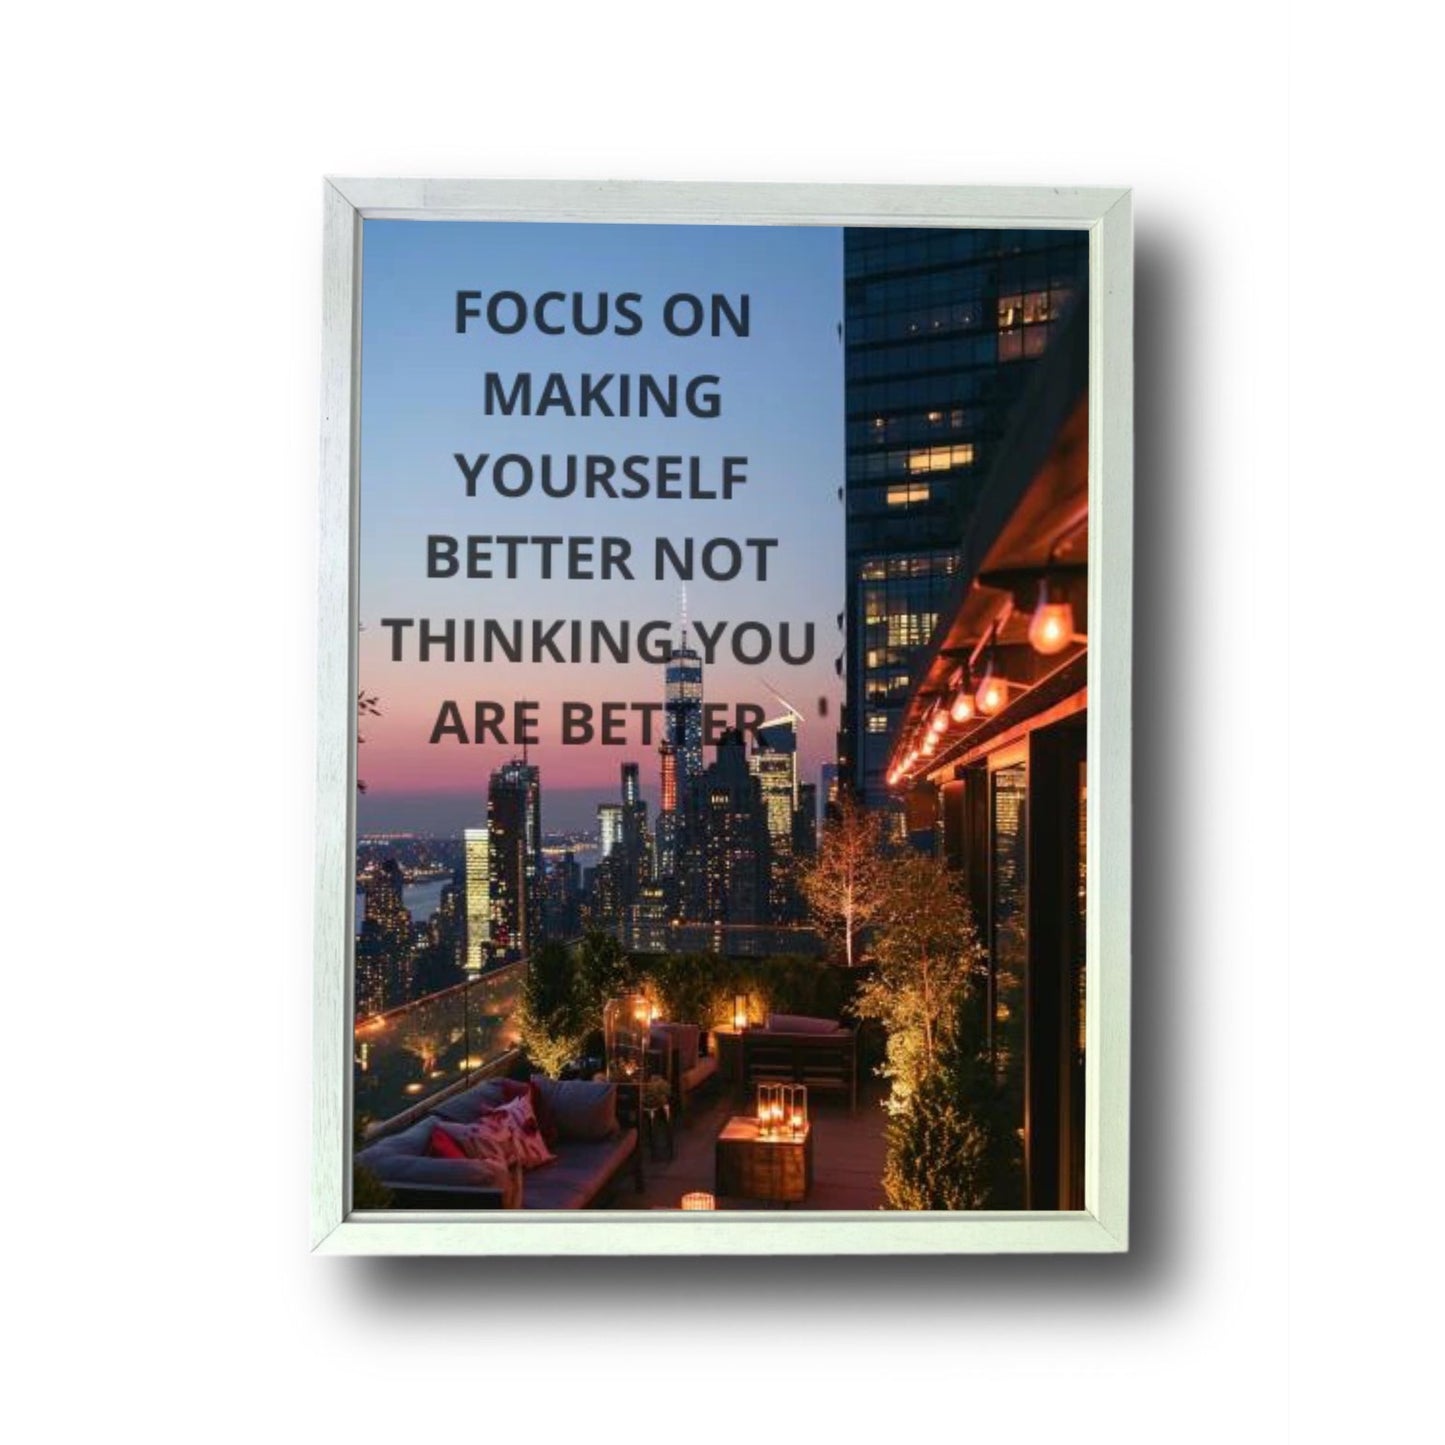 FOCUS ON MAKING YOURSELF BETTER NOT THINKING YOU ARE BETTER